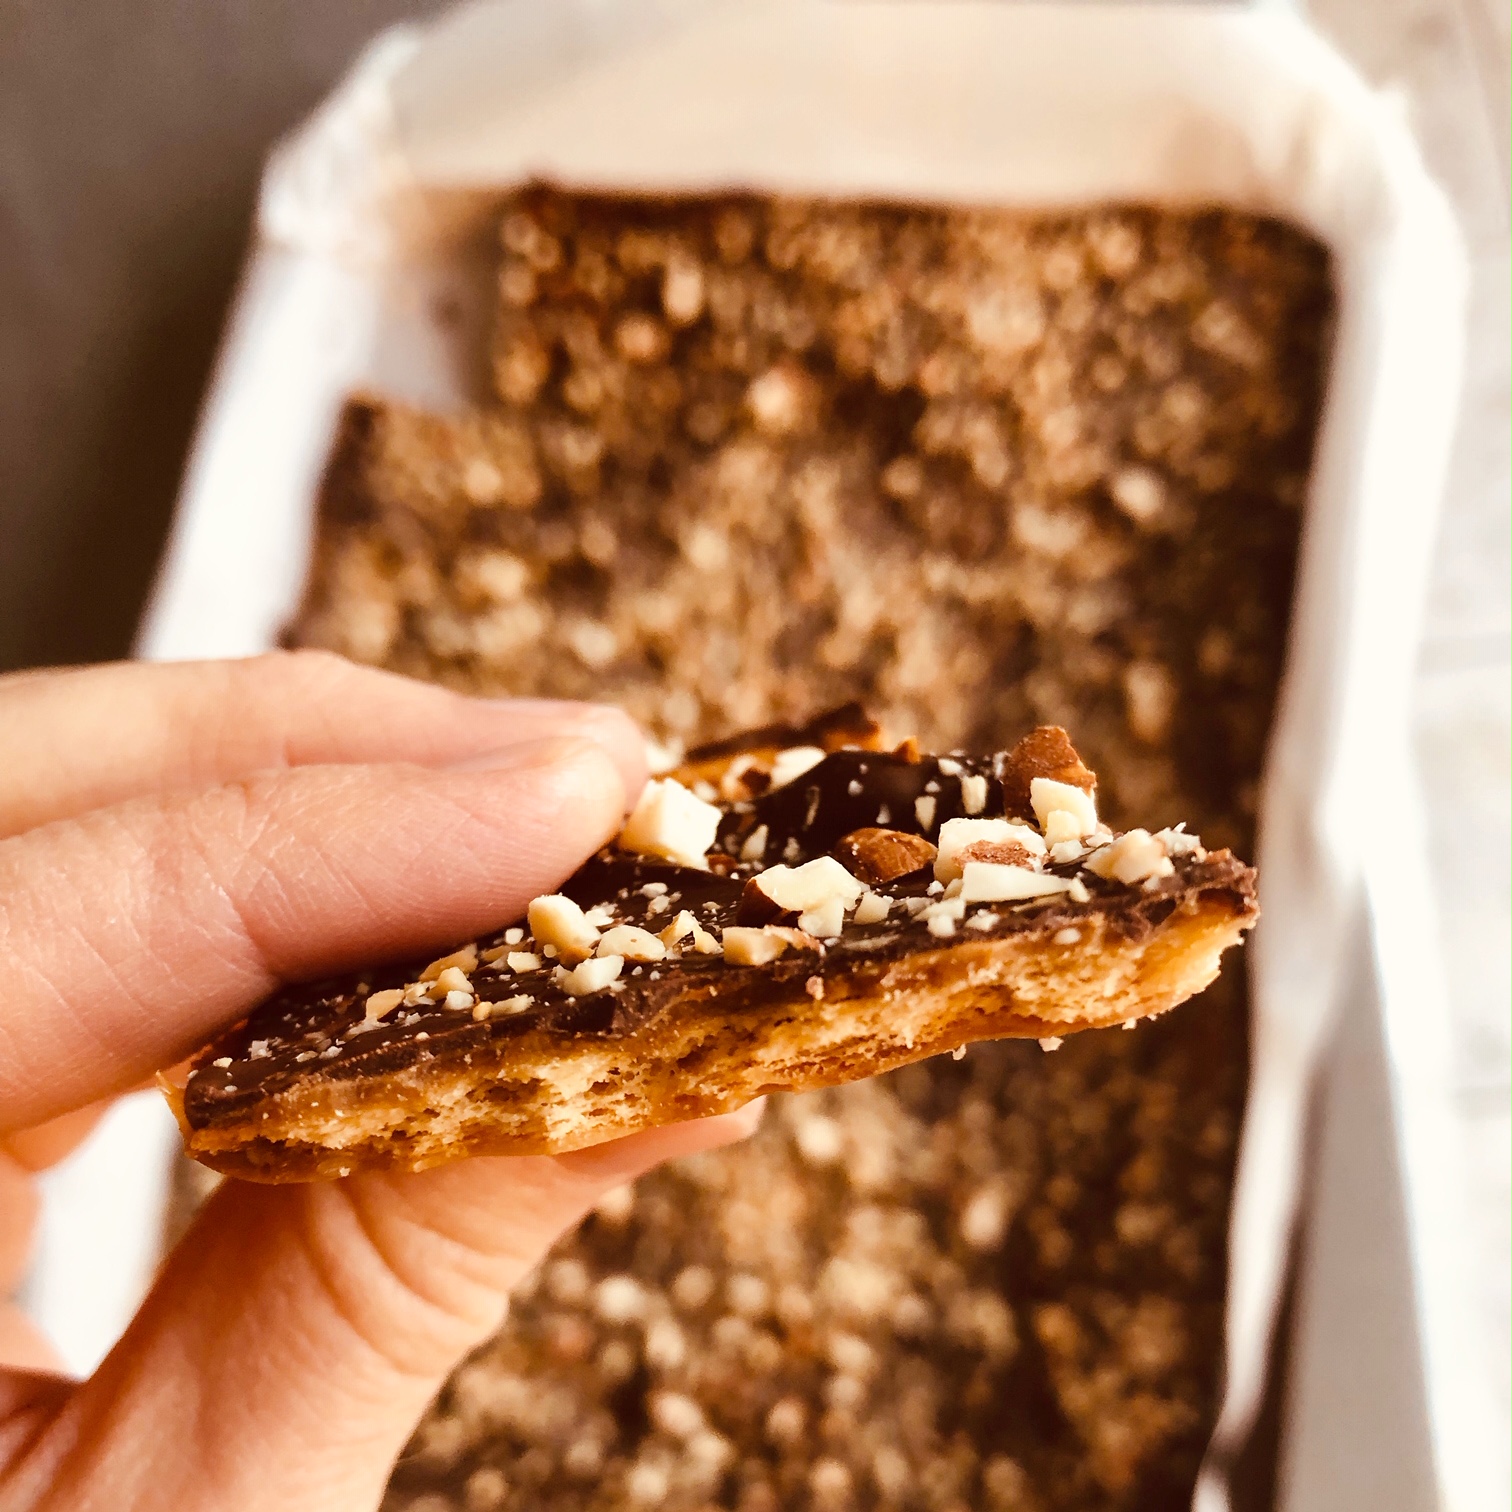 Break up your Christmas Crack and sneak a bite!